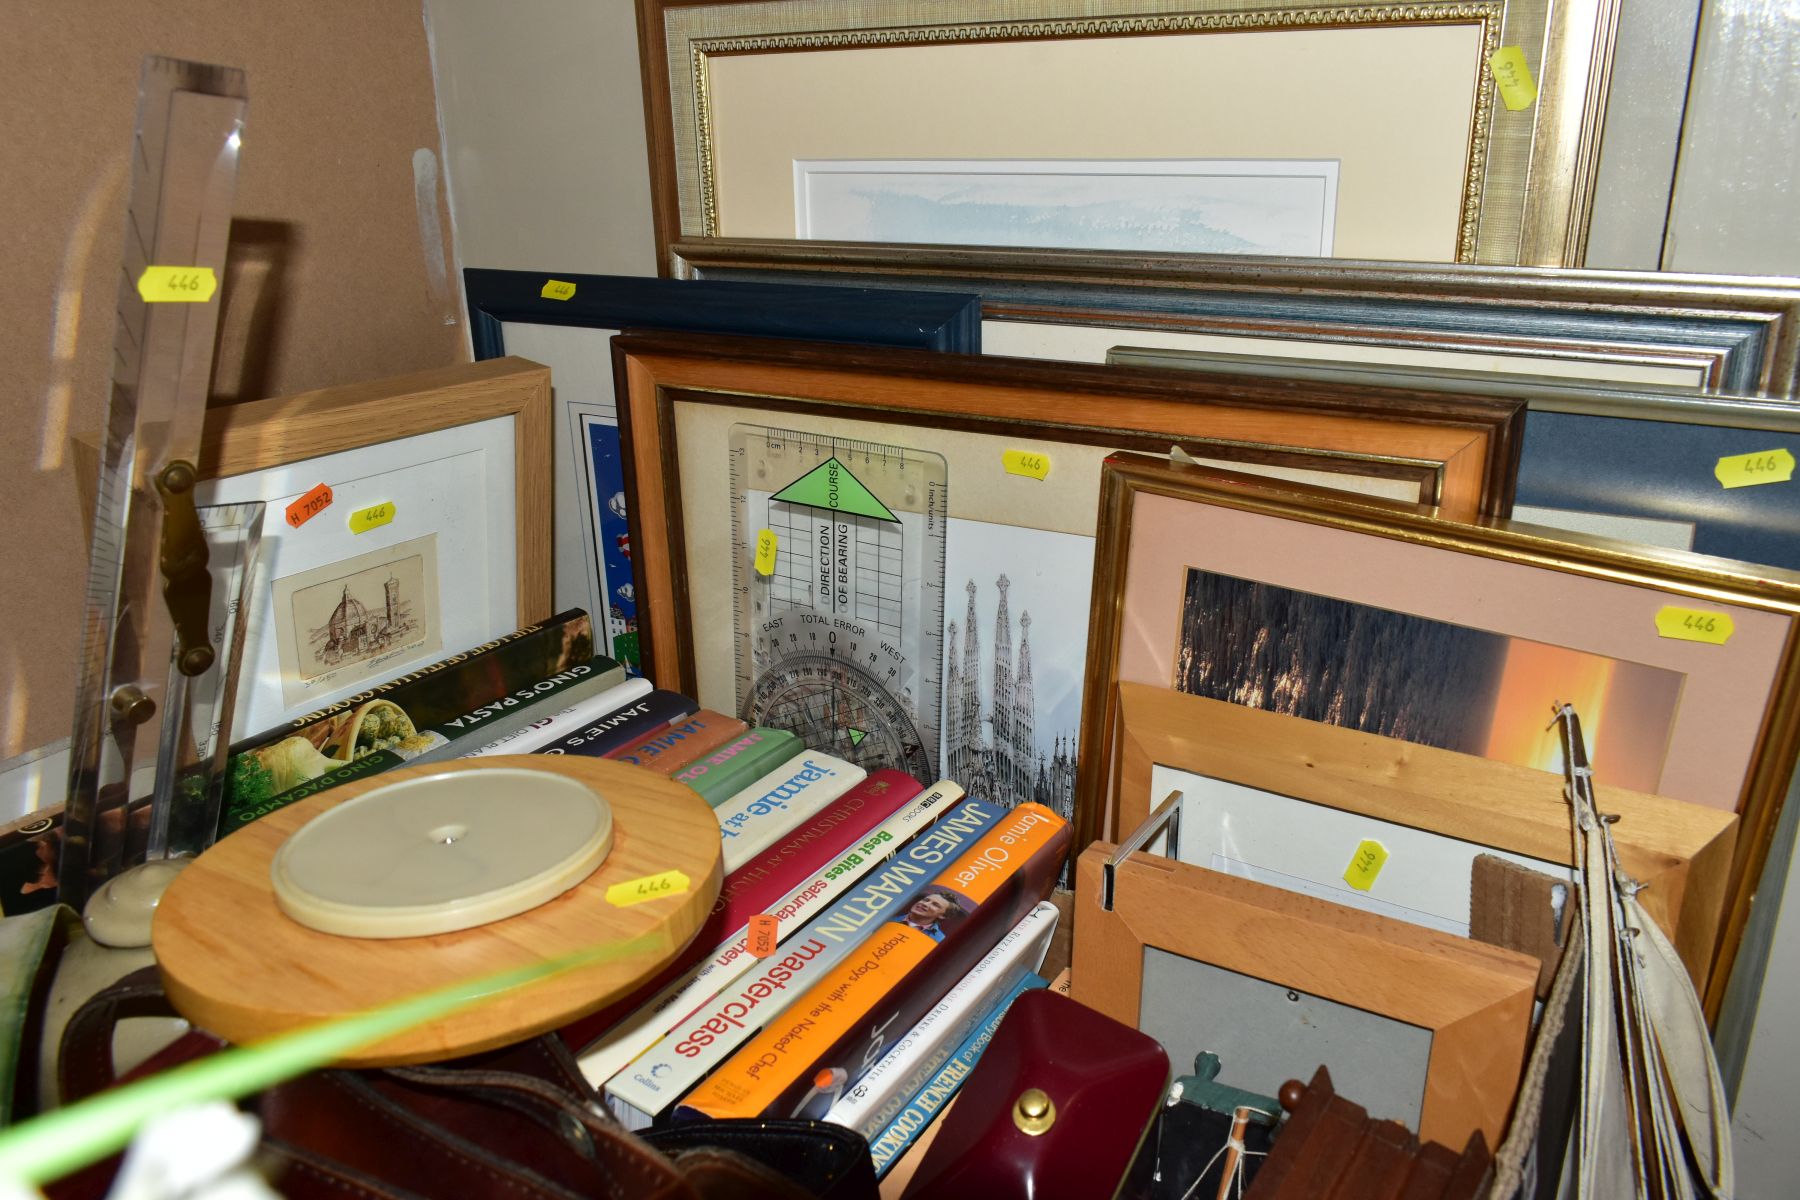 LOOSE PRINTS, BOX OF SEASHELLS, A BOX OF COOKERY BOOKS, ETC, including a modern Danish Scan-Globe - Image 6 of 10